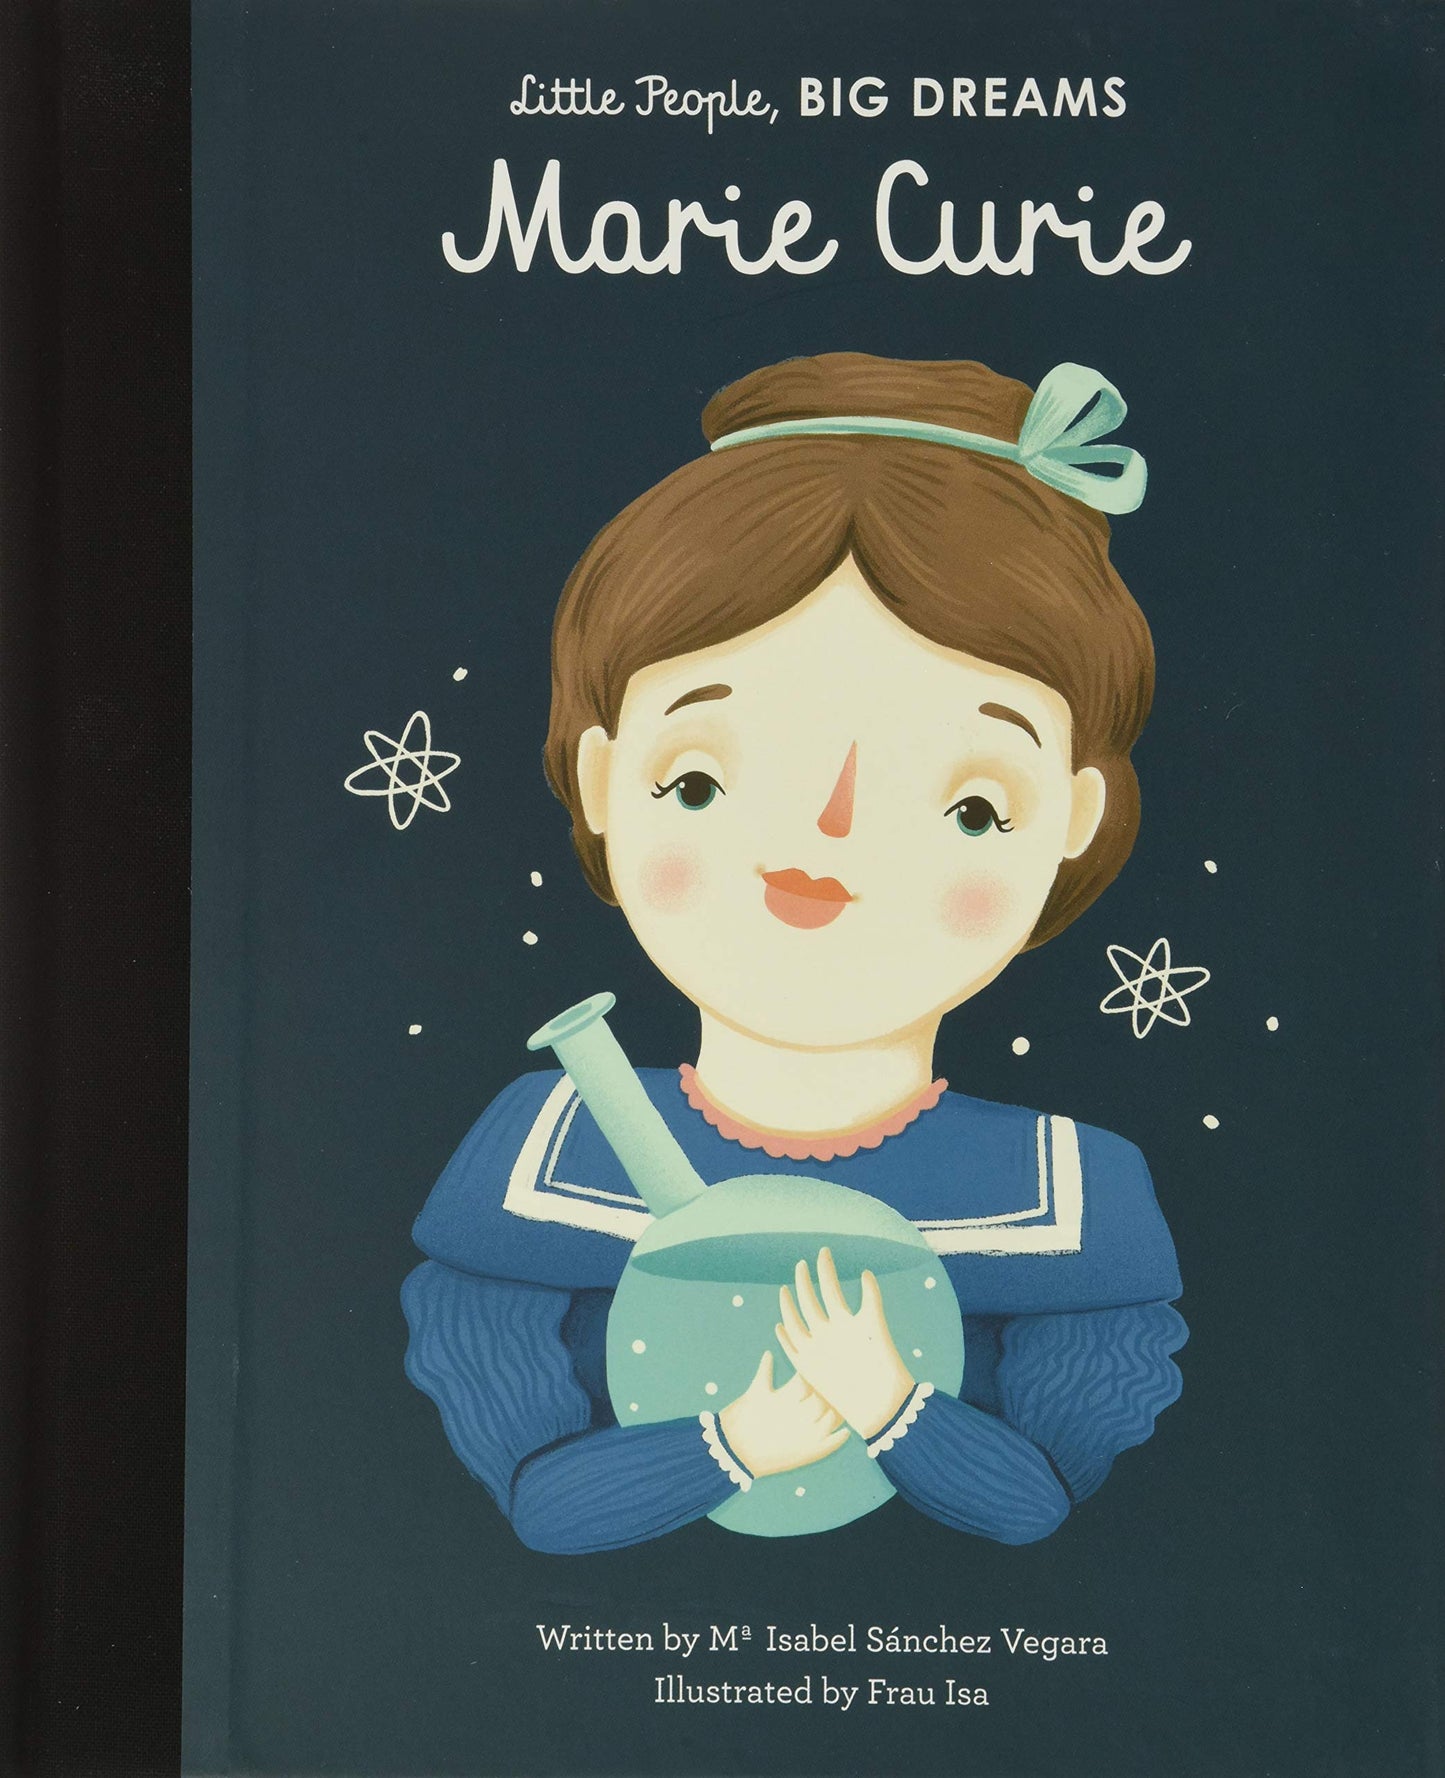 In this international bestseller from the critically acclaimed Little People, BIG DREAMS series, discover the life of Marie Curie, the Nobel Prize–winning scientist.